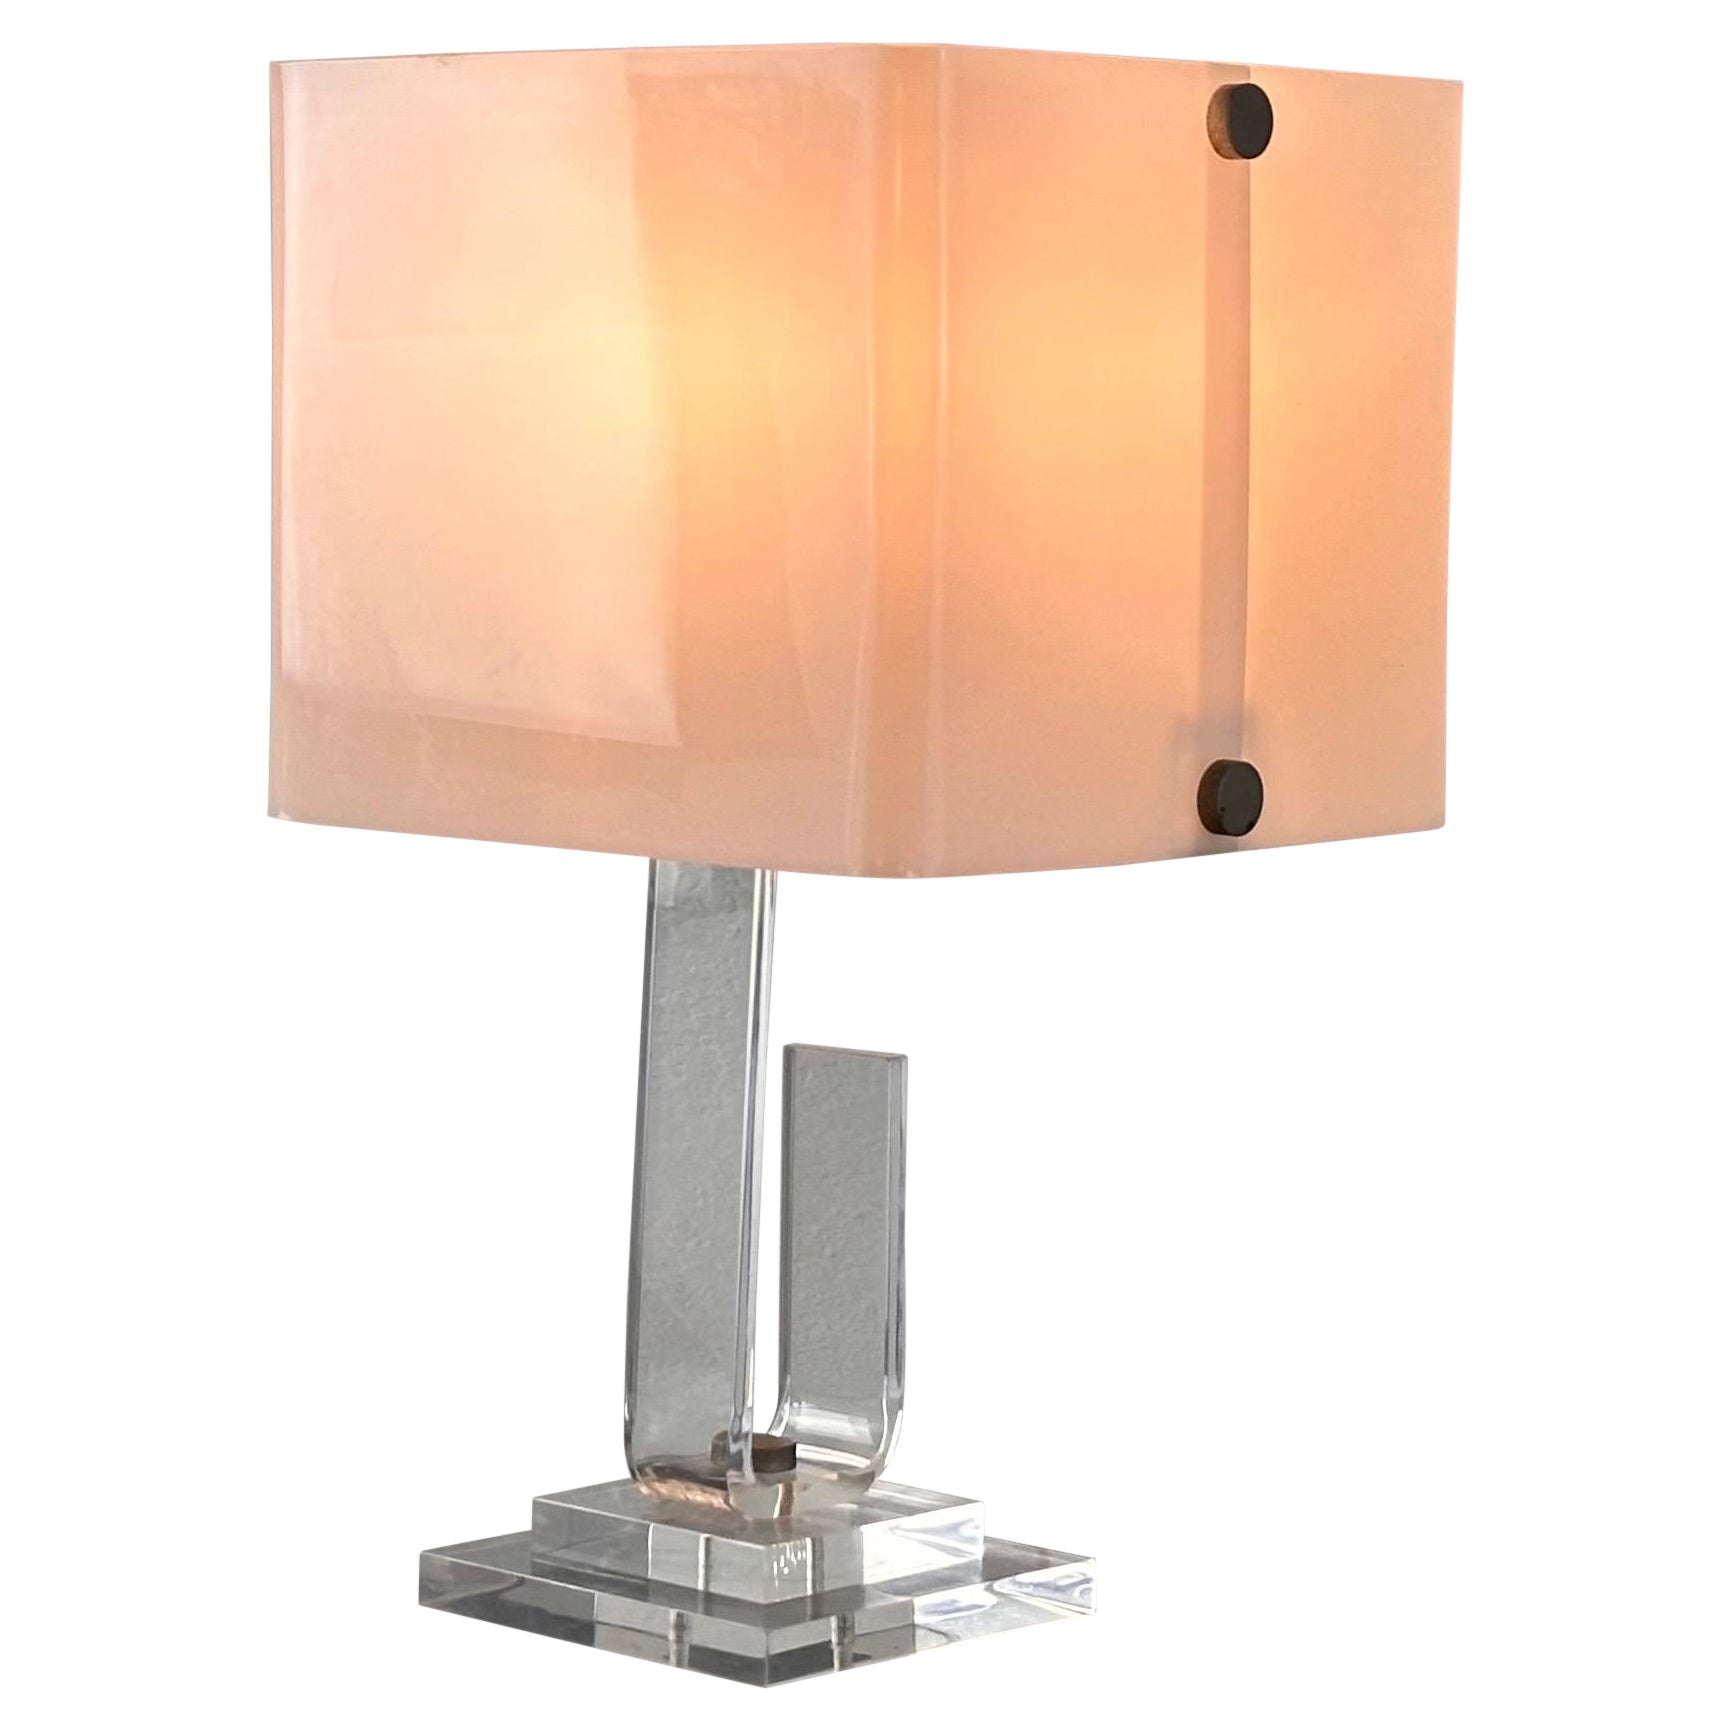 Exquisite Sandro Petti Plexiglass and Brass Table Lamp from Rome, 1970s For Sale